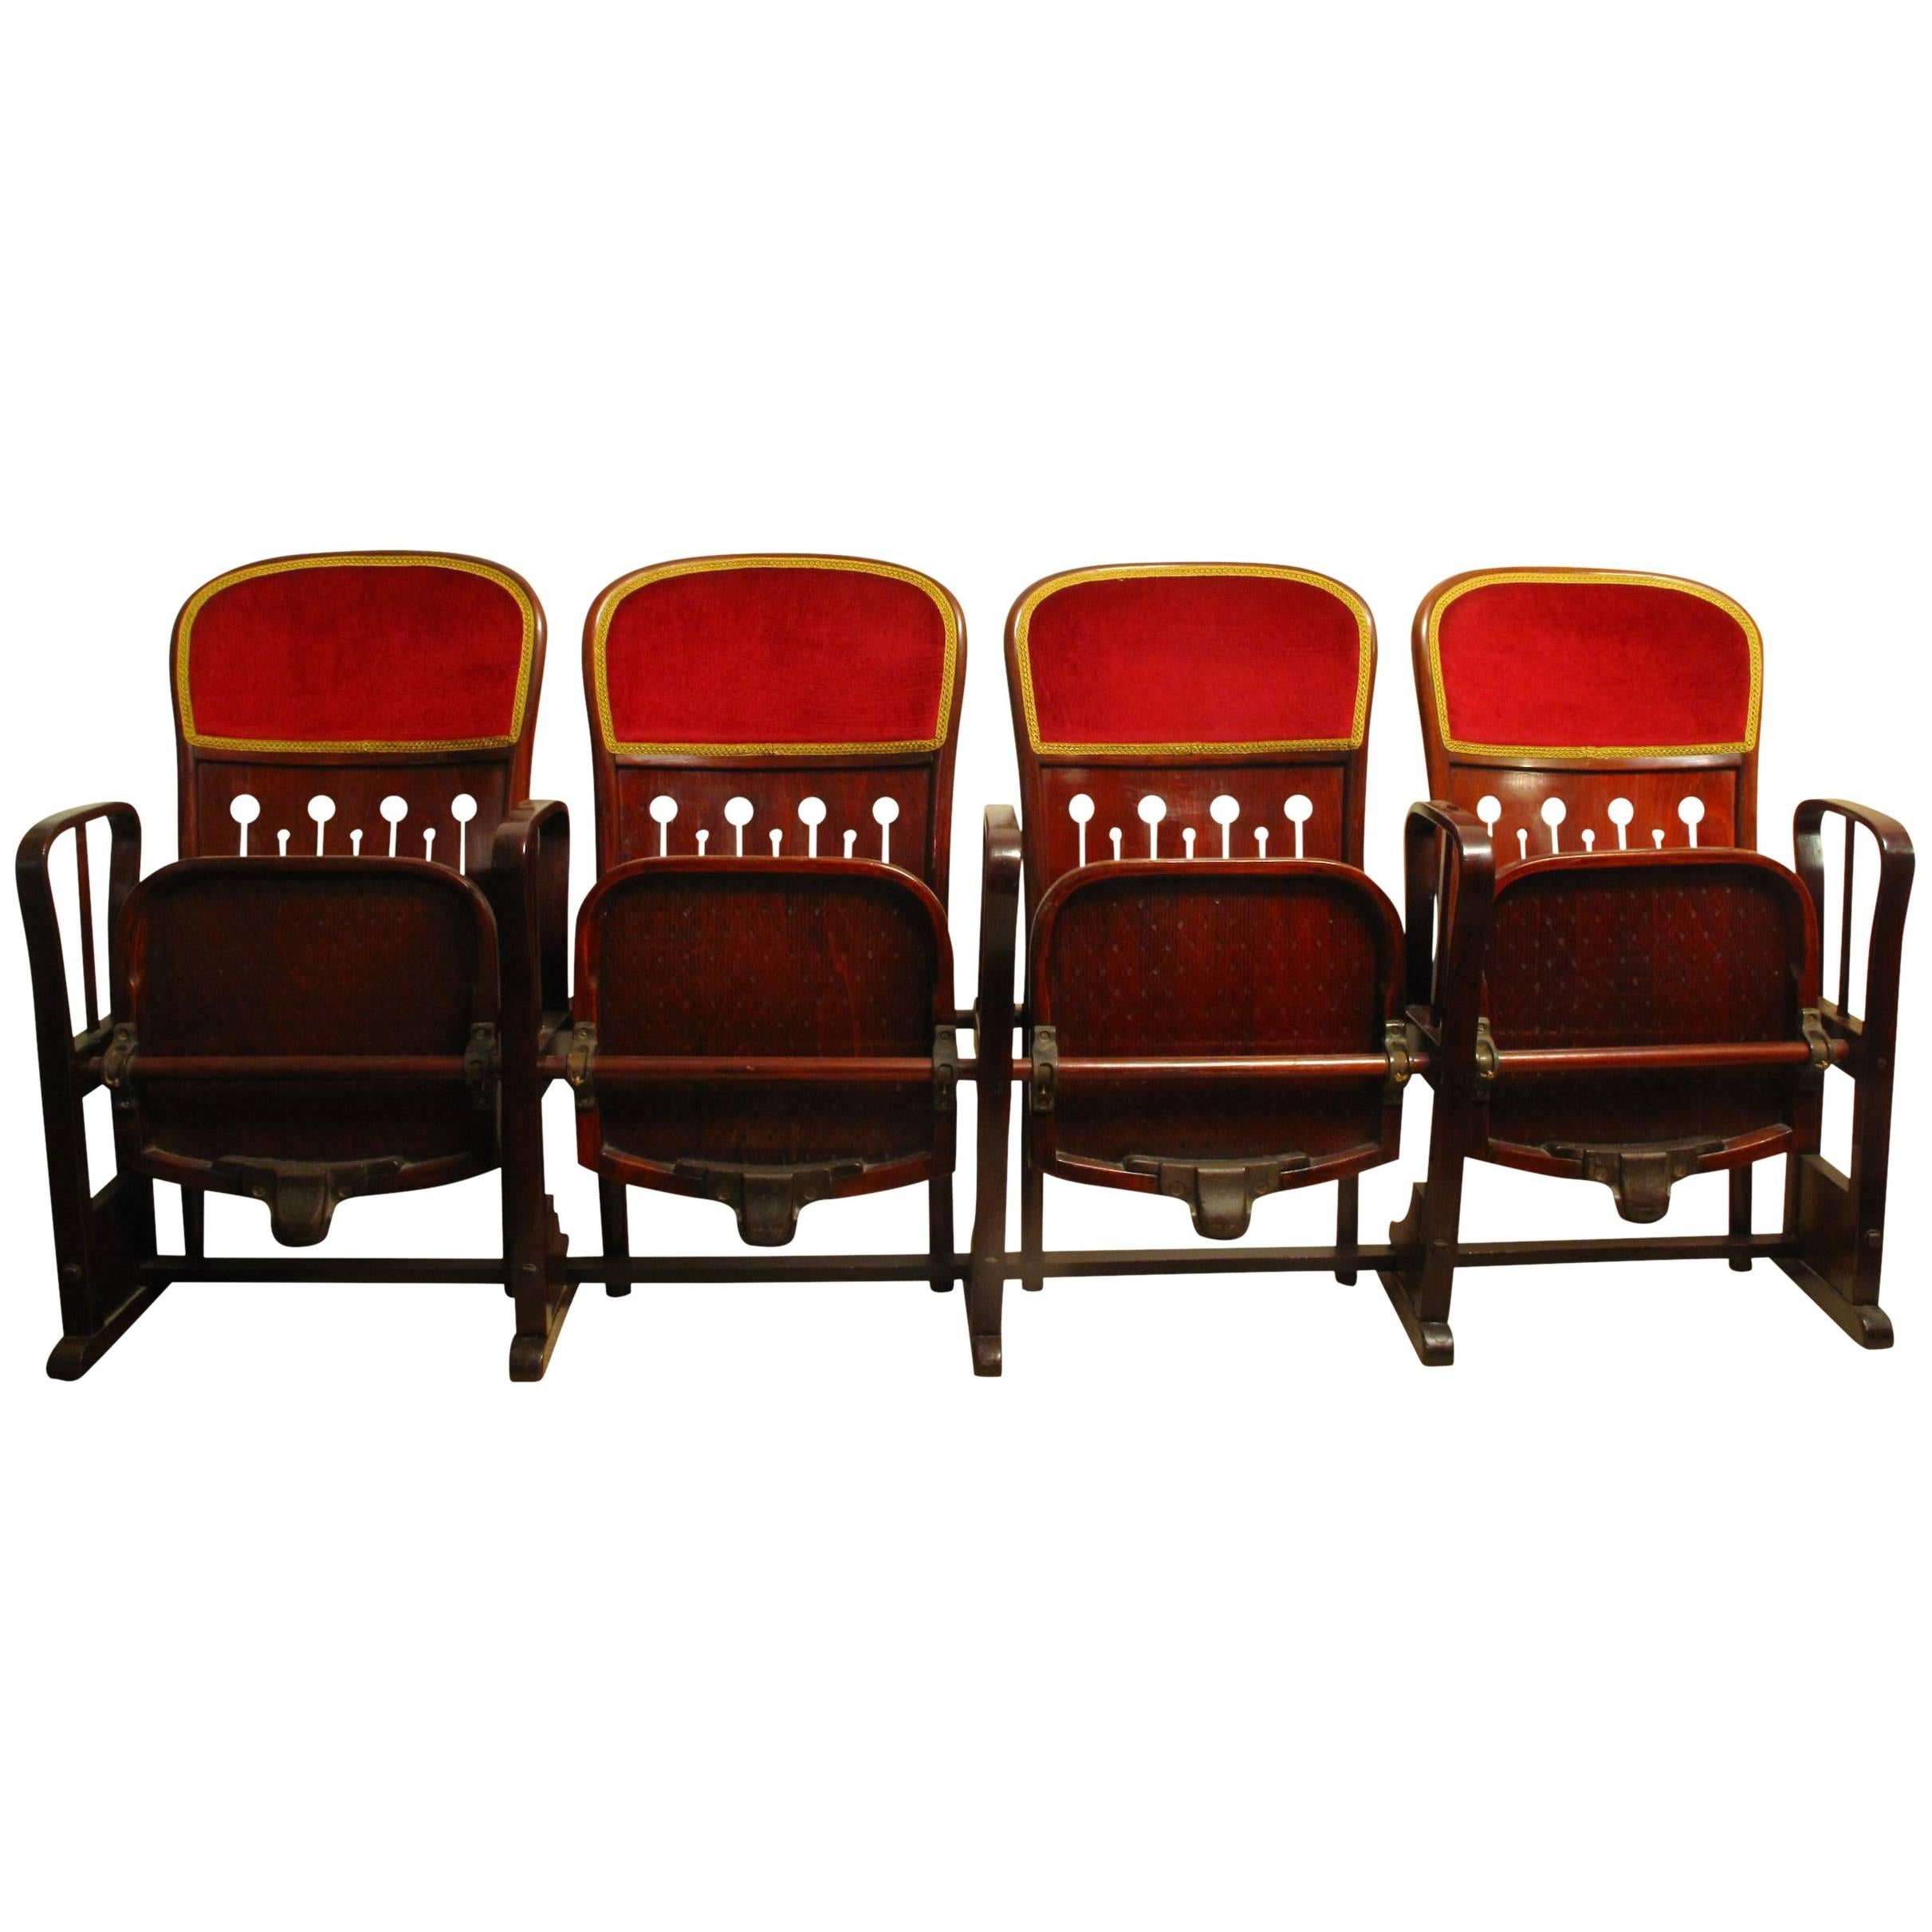 Row of Four Bentwood Viennese Theatre Chairs by Thonet, circa 1907 For Sale